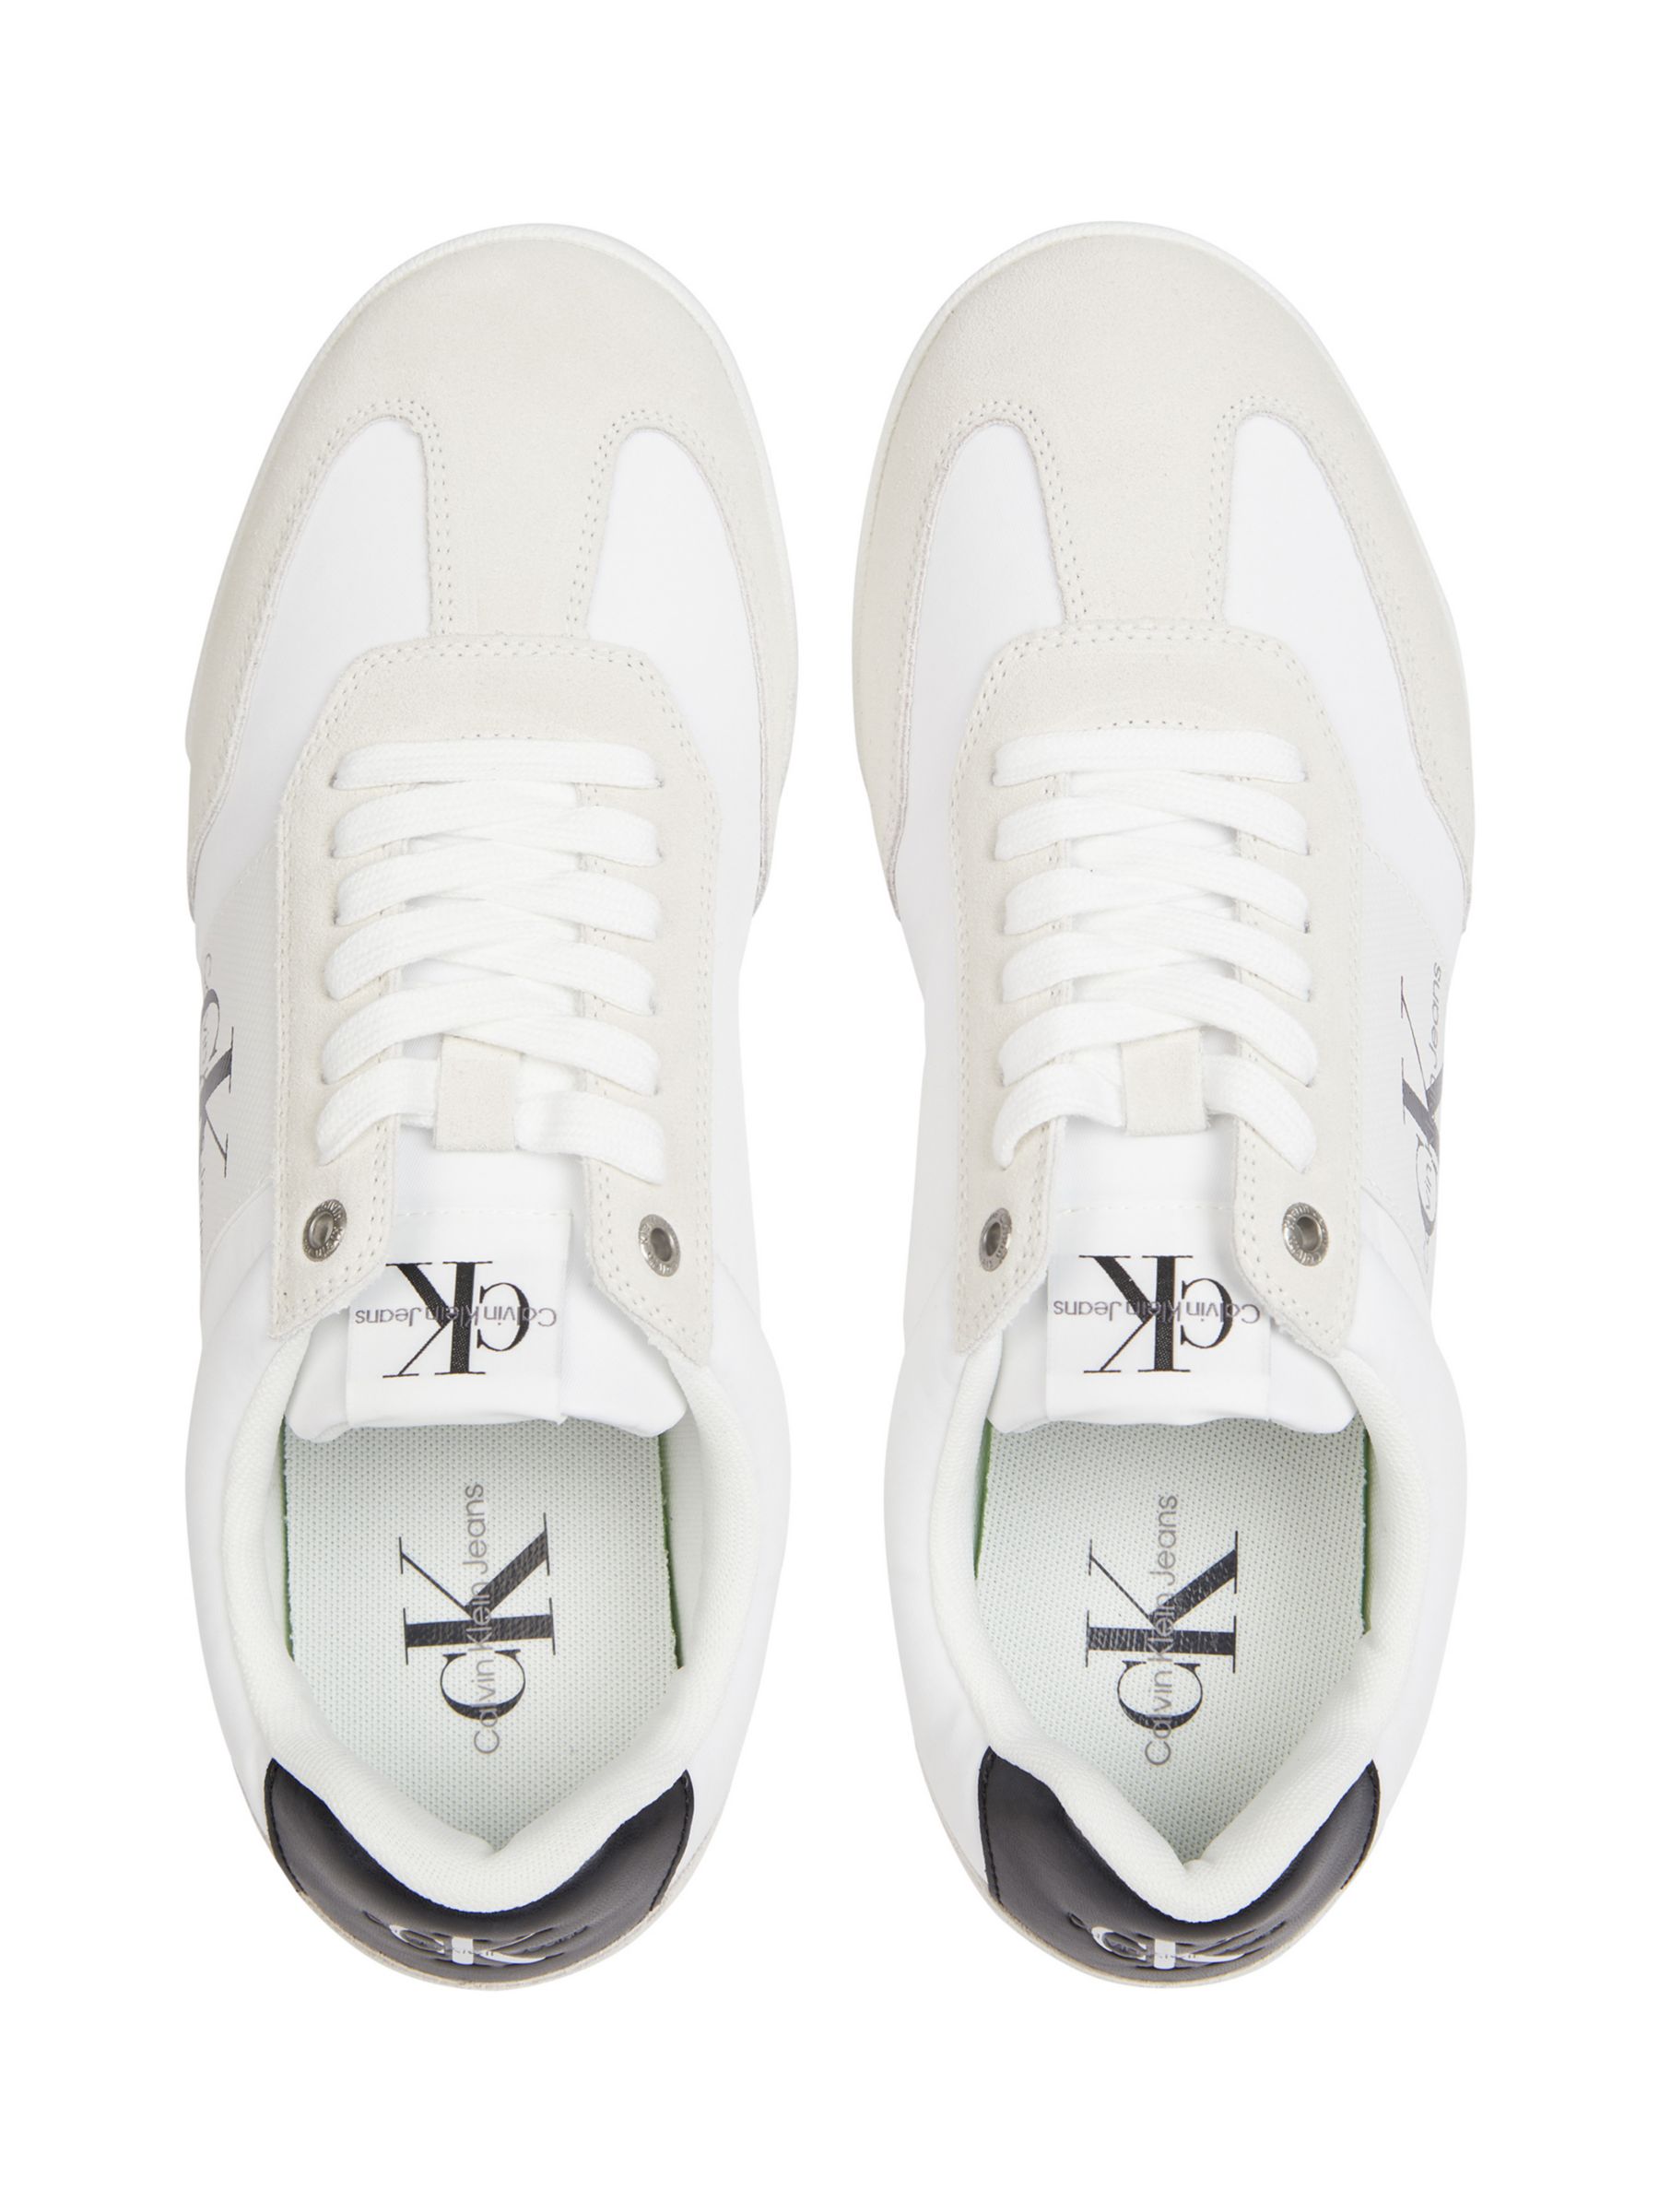 Buy Calvin Klein Jeans Mono Leather Lace-Up Trainers Online at johnlewis.com